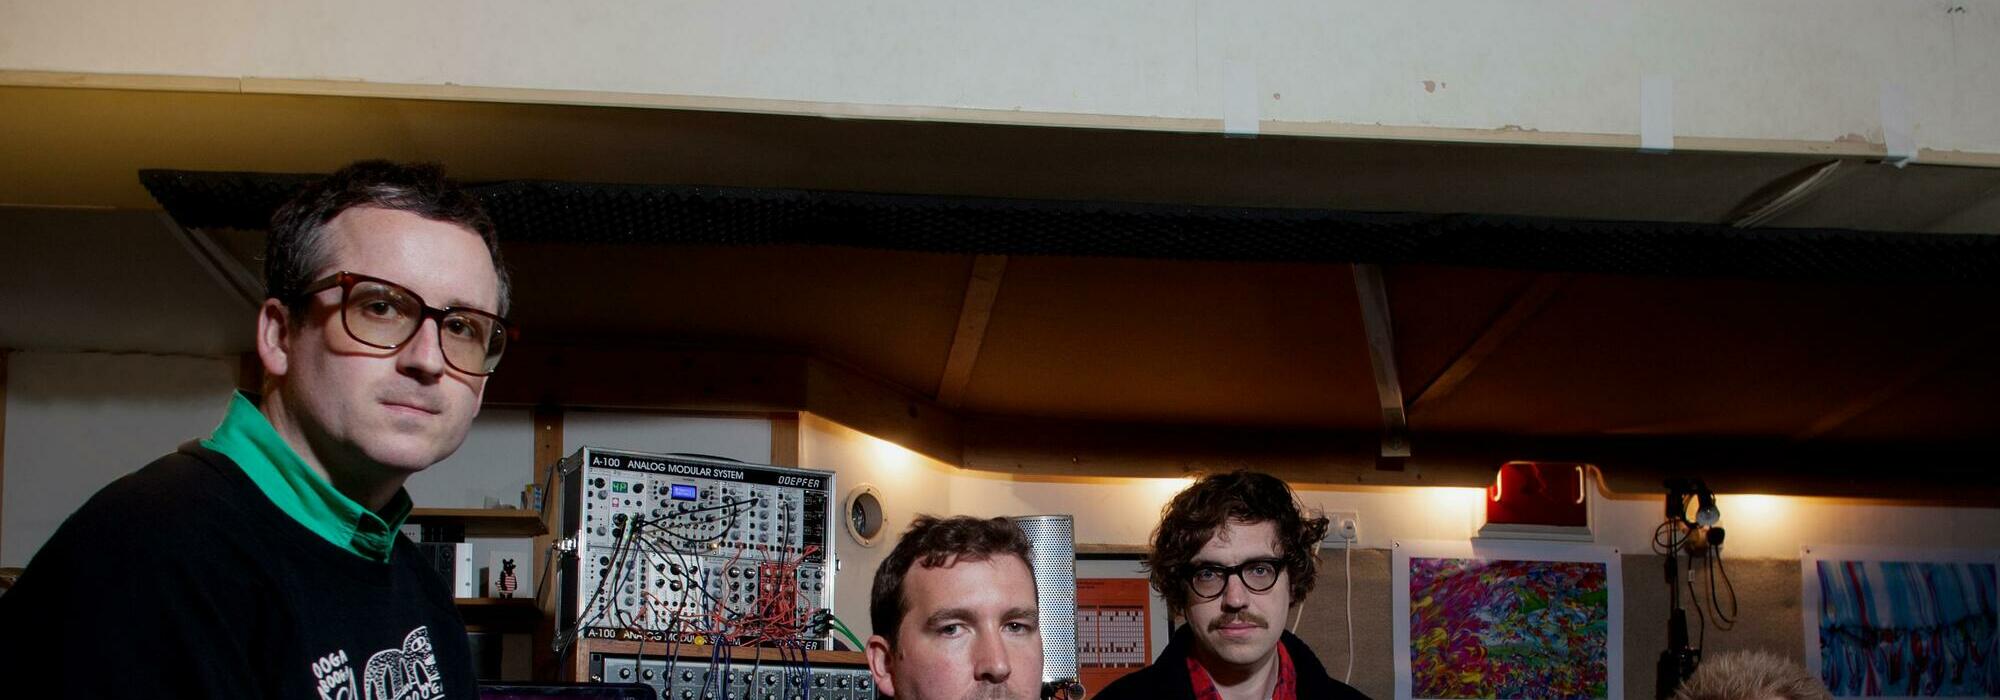 A Hot Chip live event